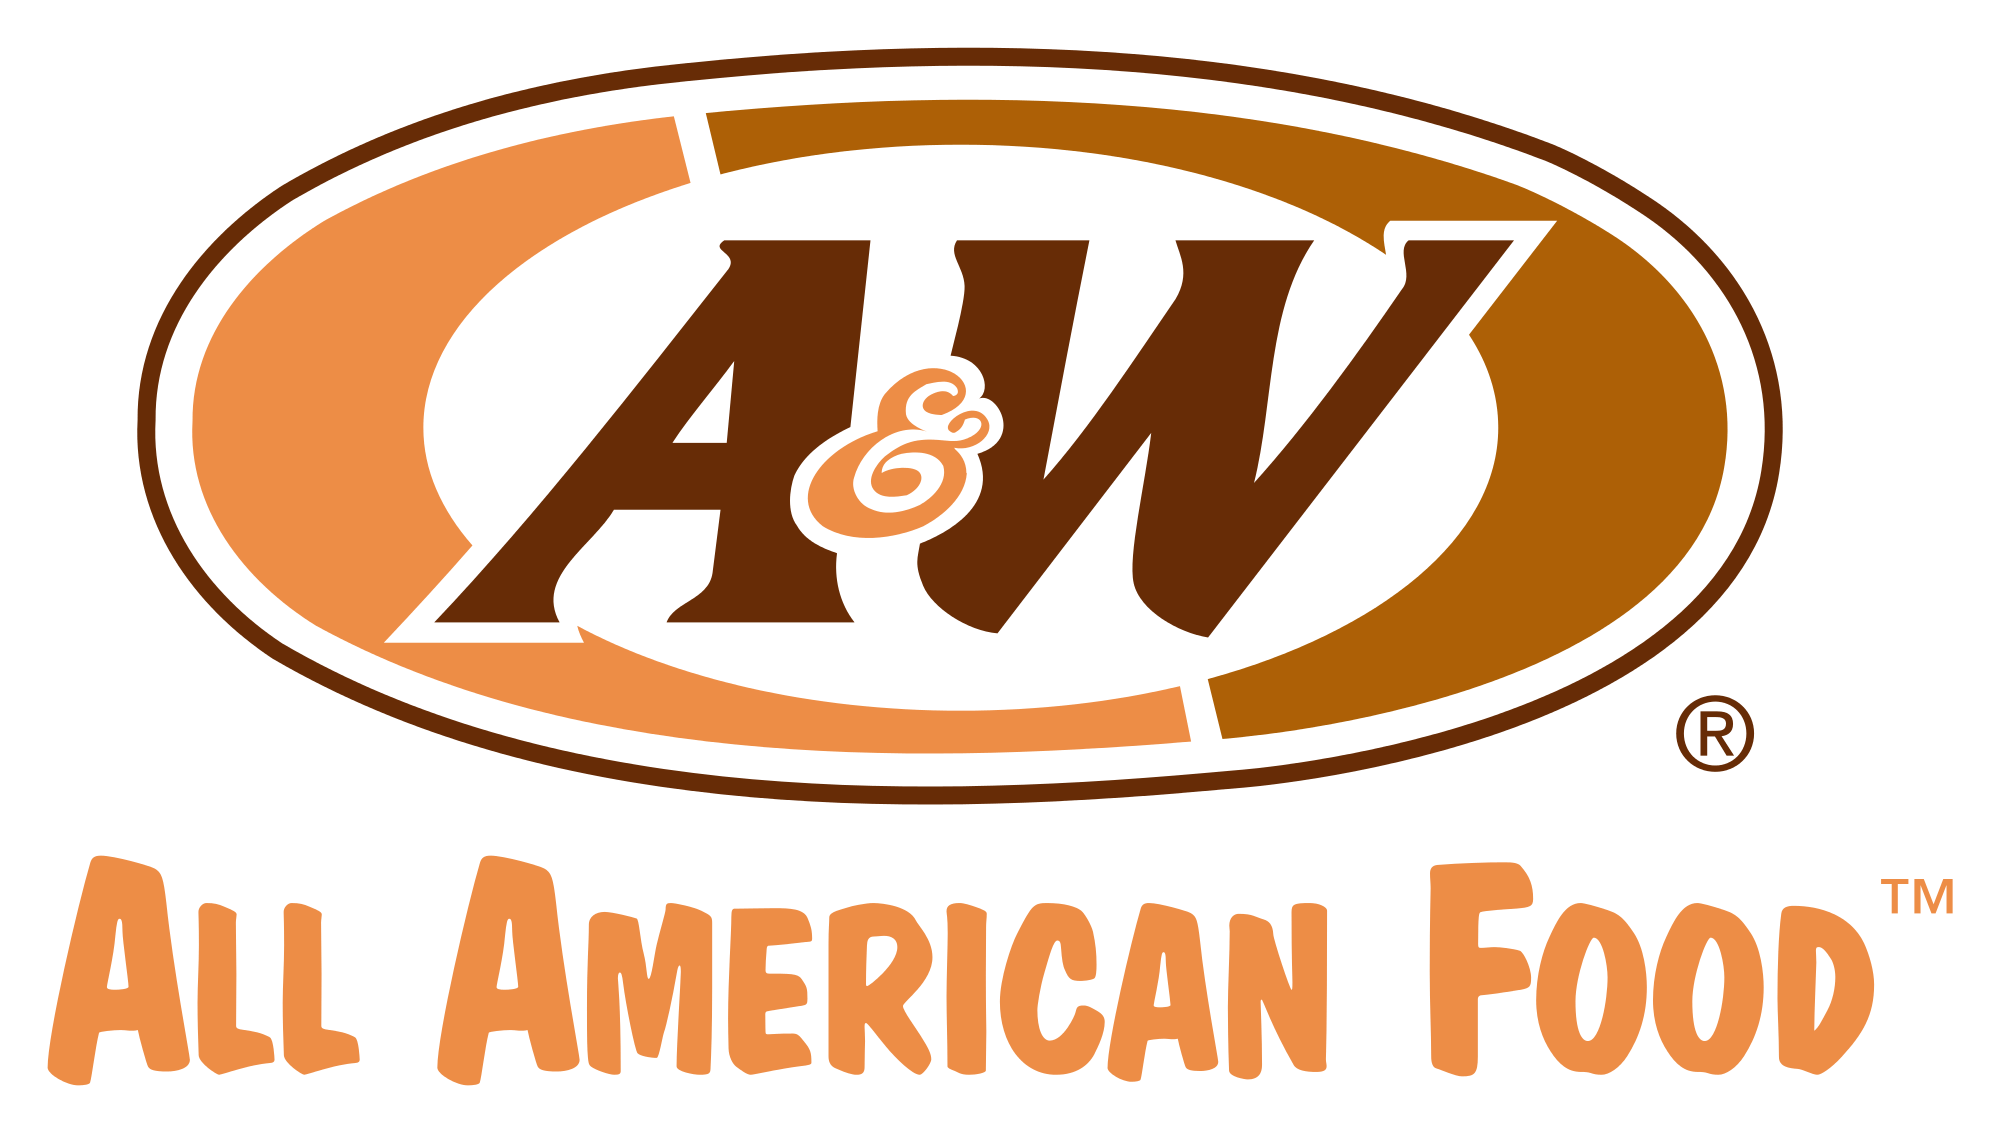 American Food Brands Logo - File:All American Food Logo.svg - Wikimedia Commons